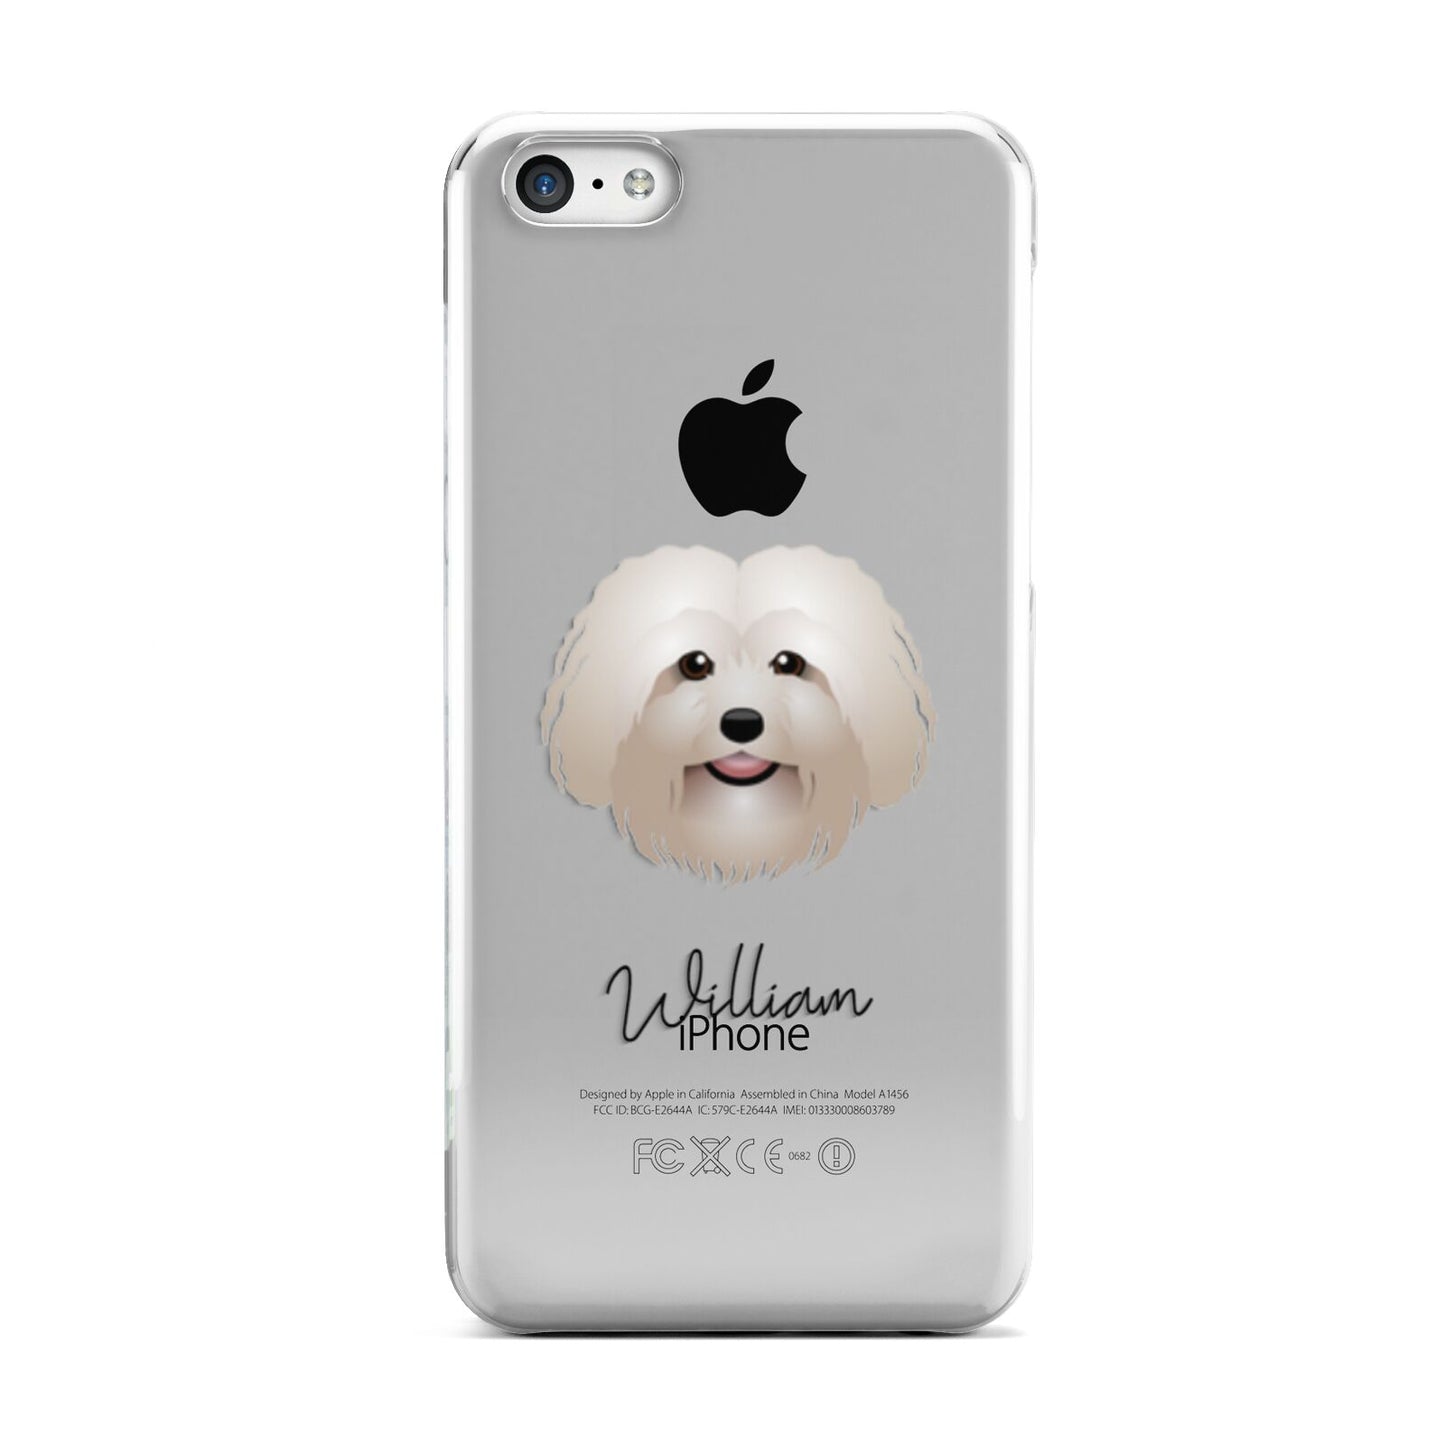 Bolognese Personalised Apple iPhone 5c Case